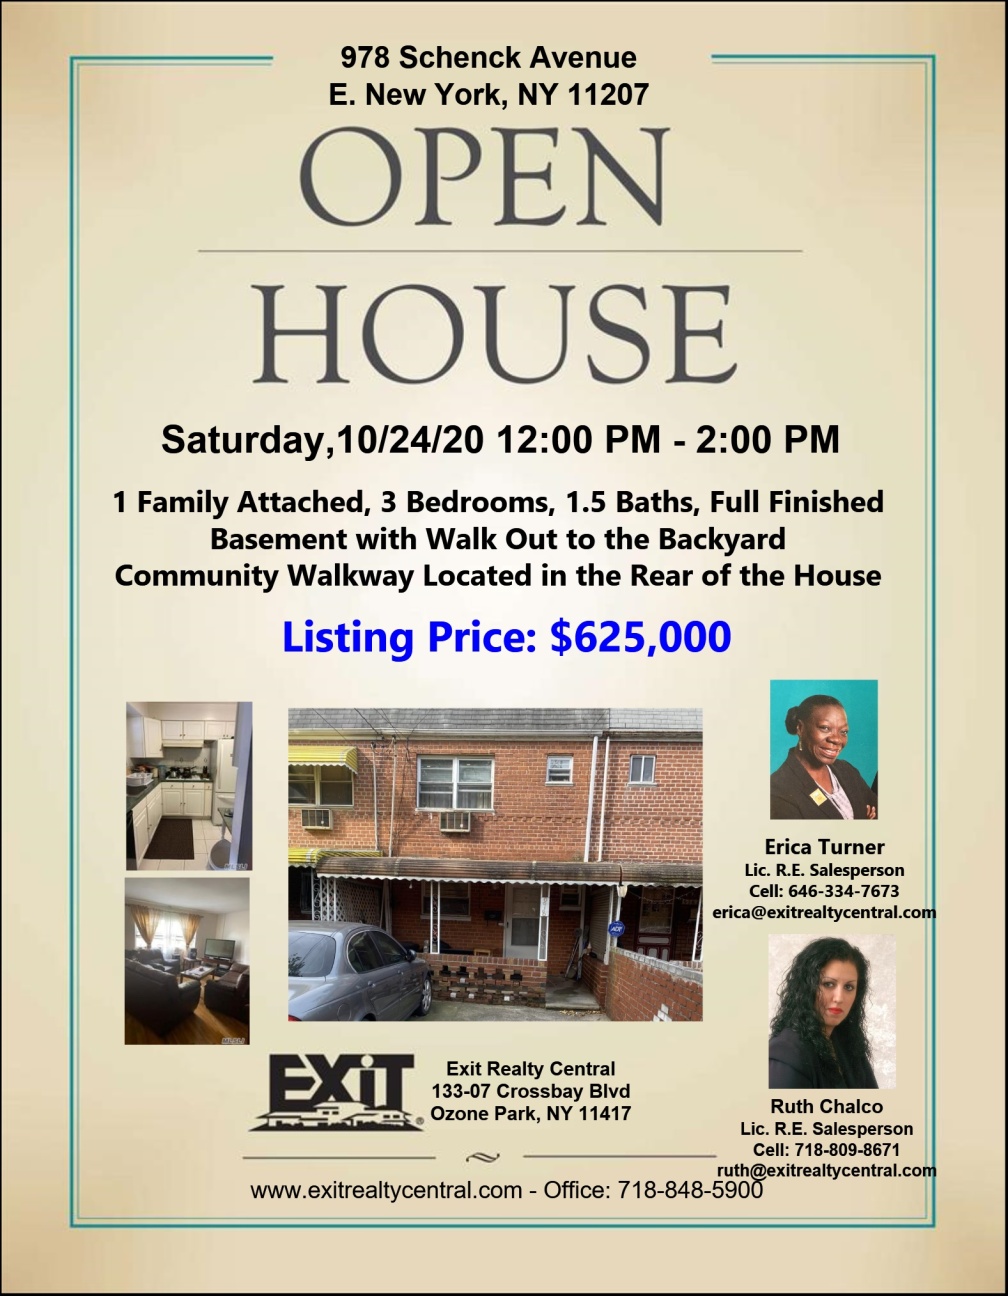 Open House in E. New York 10/24 - 12-2pm